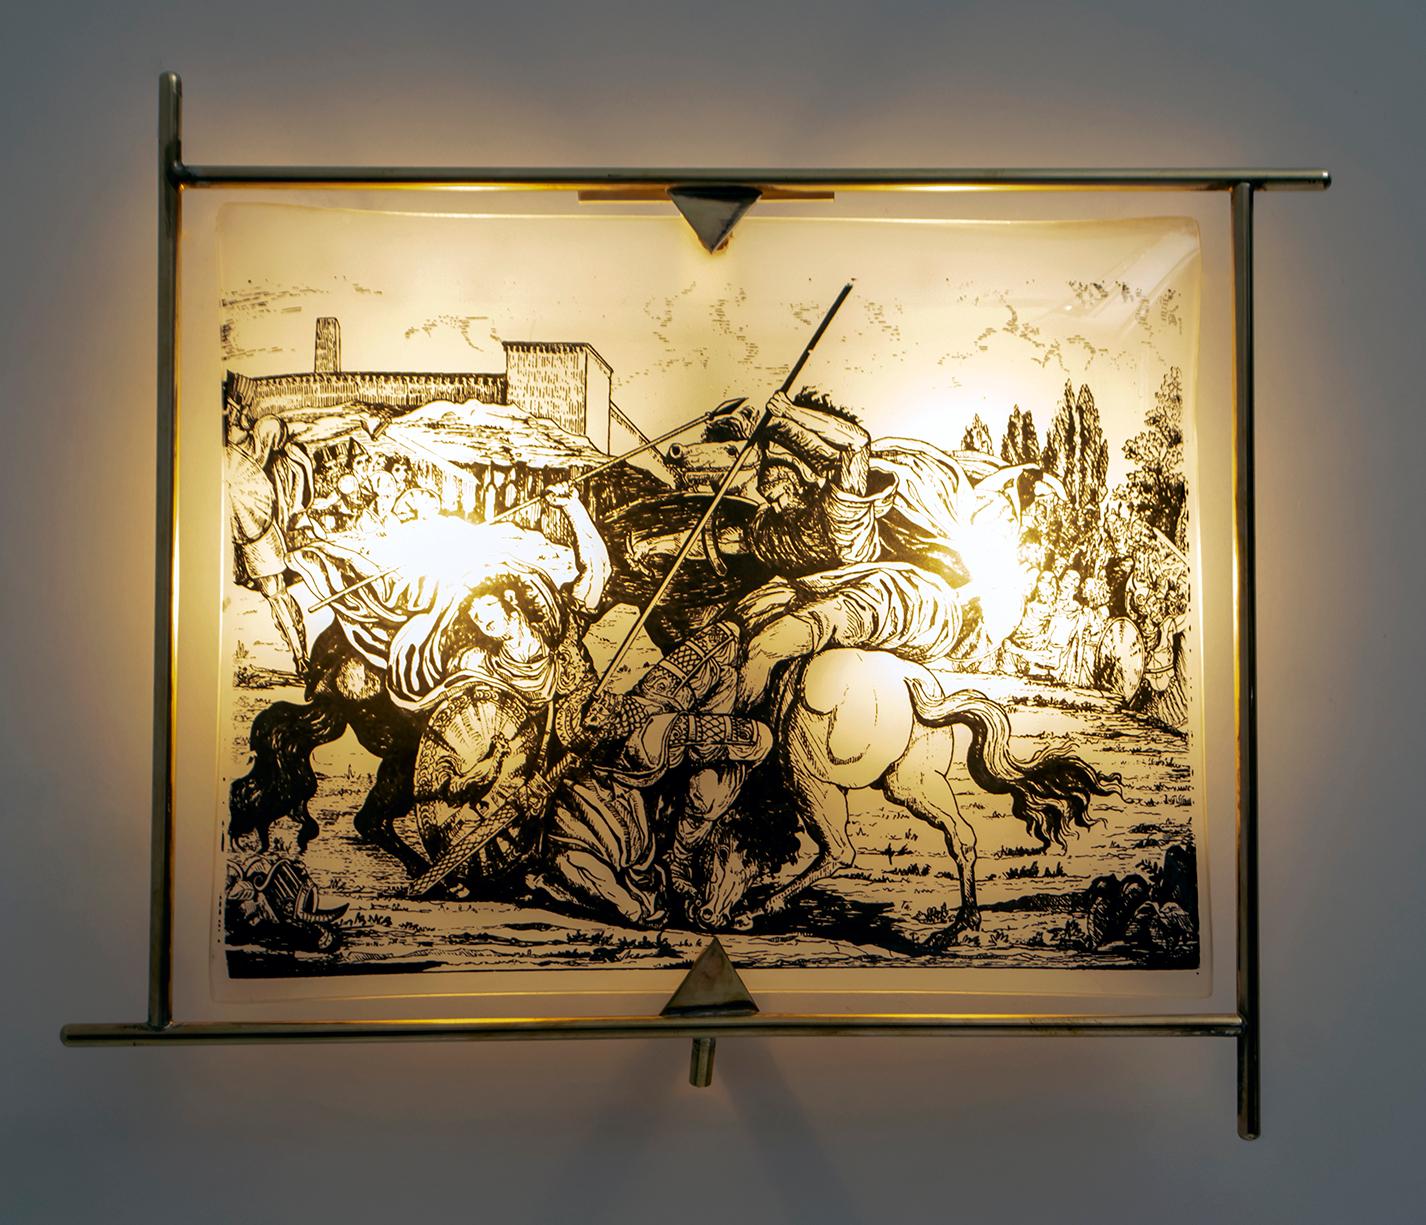 Original wall lamp in brass and etched and silk-screened curved glass with a scene of a battle in the age of ancient Rome.